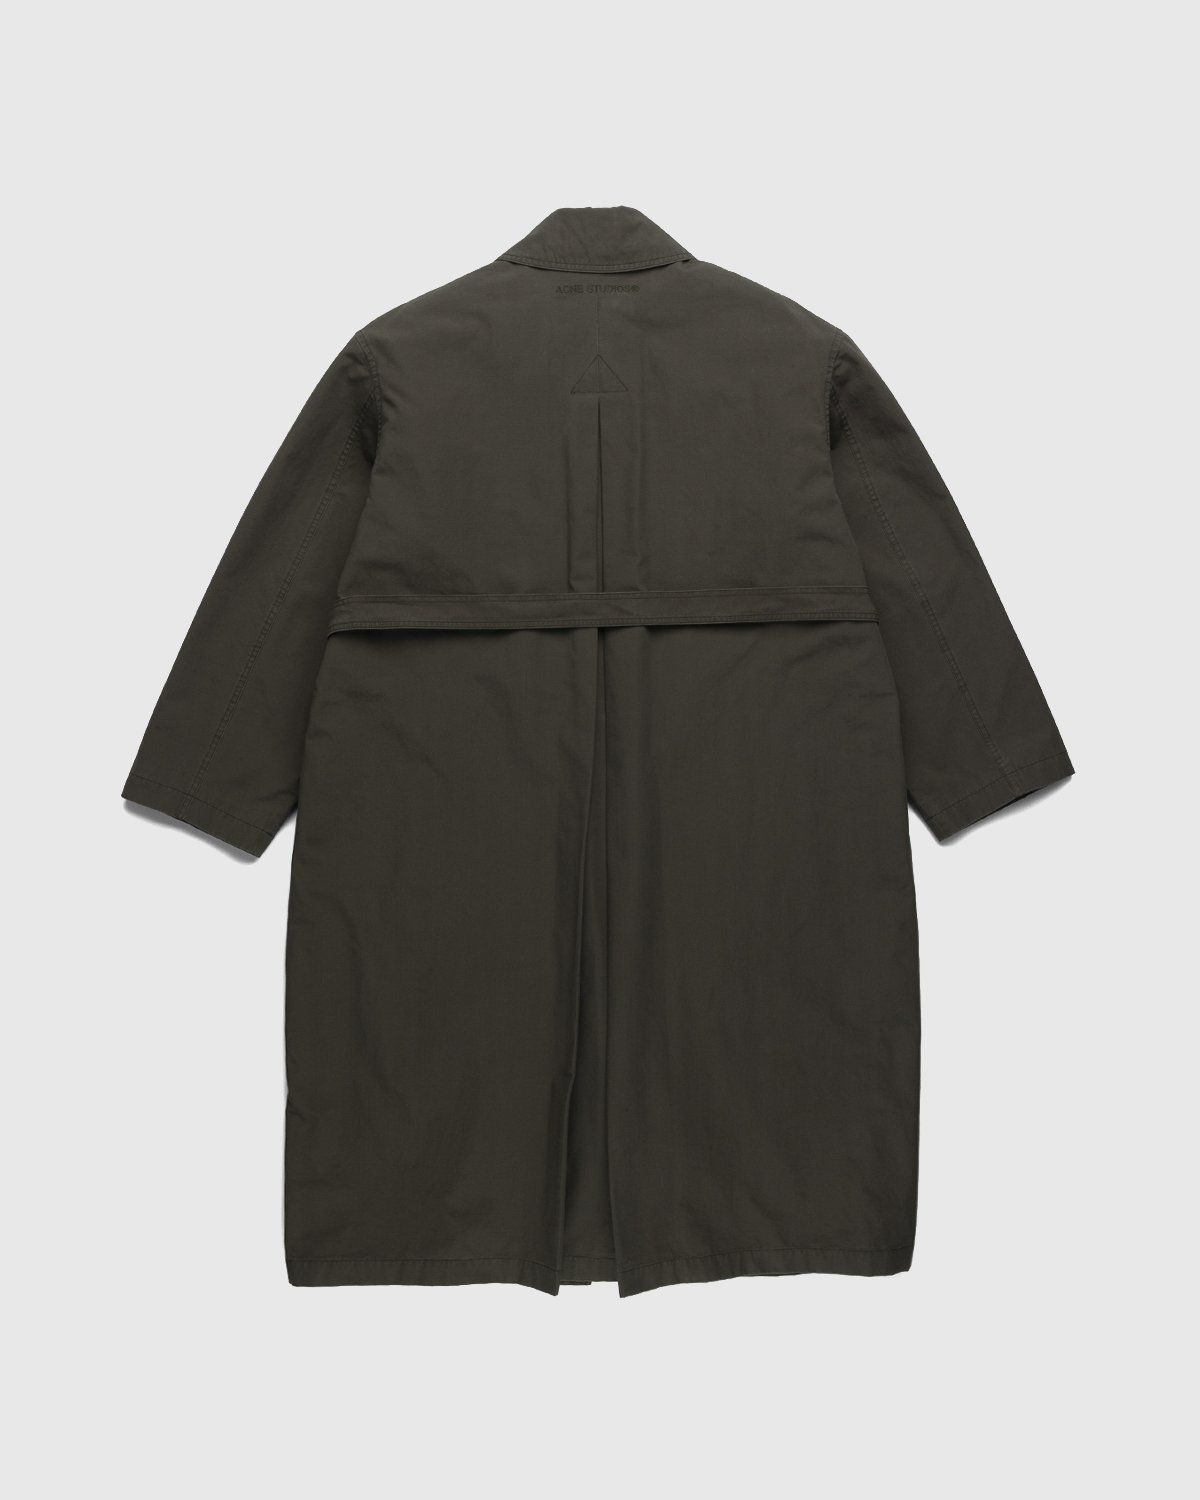 Acne Studios – Trench Coat Dark Olive - Outerwear - Green - Image 2